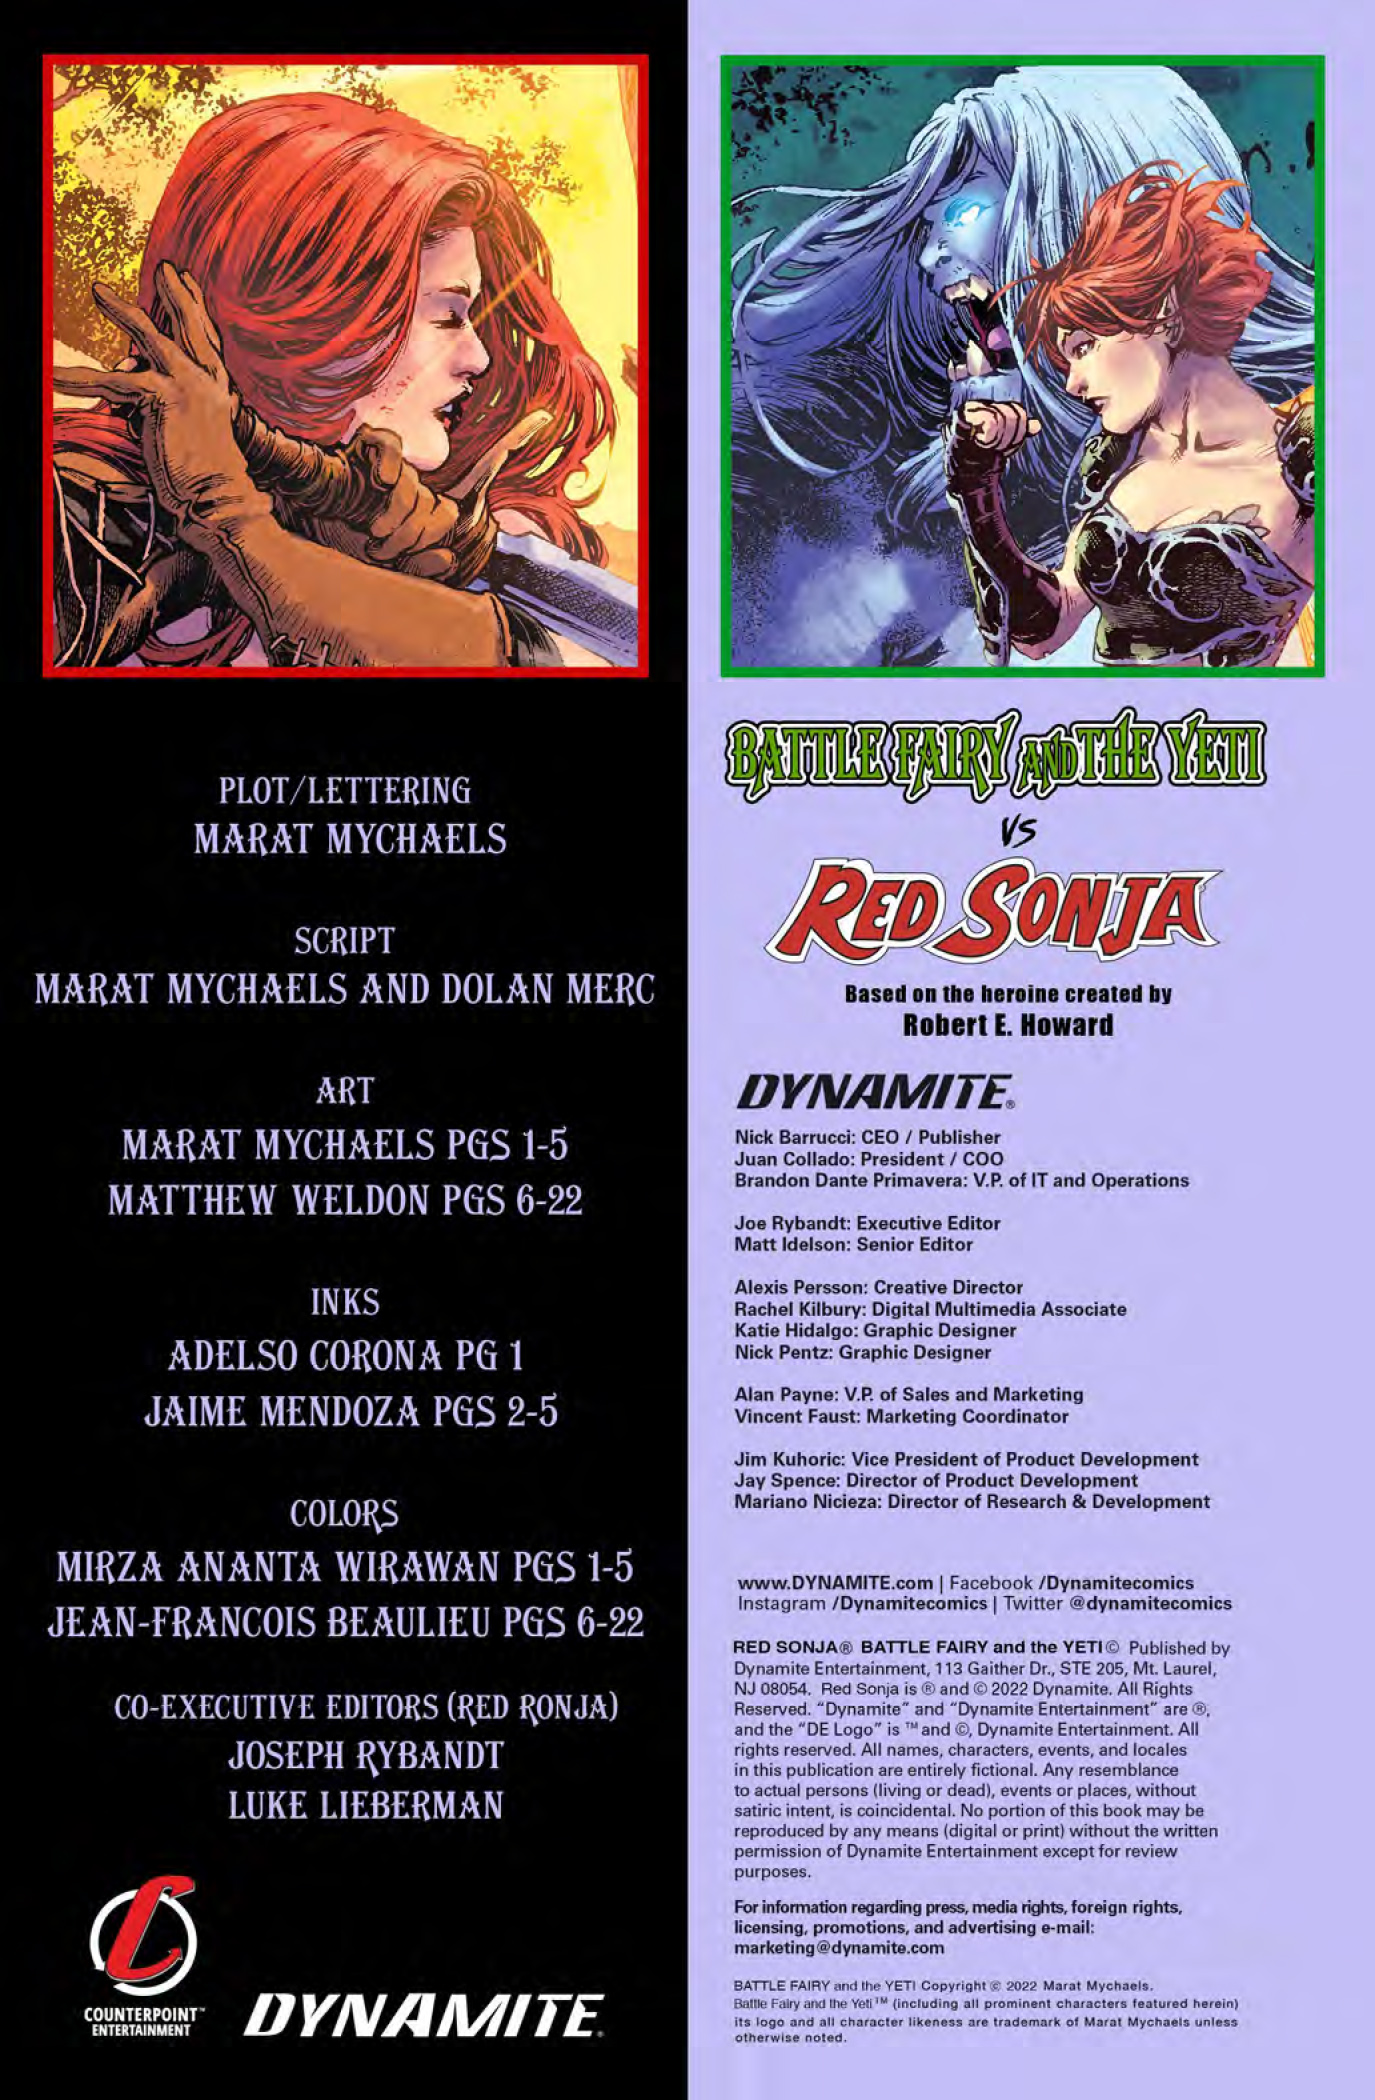 Read online Red Sonja: Battle Fairy and the Yeti comic -  Issue # Full - 2